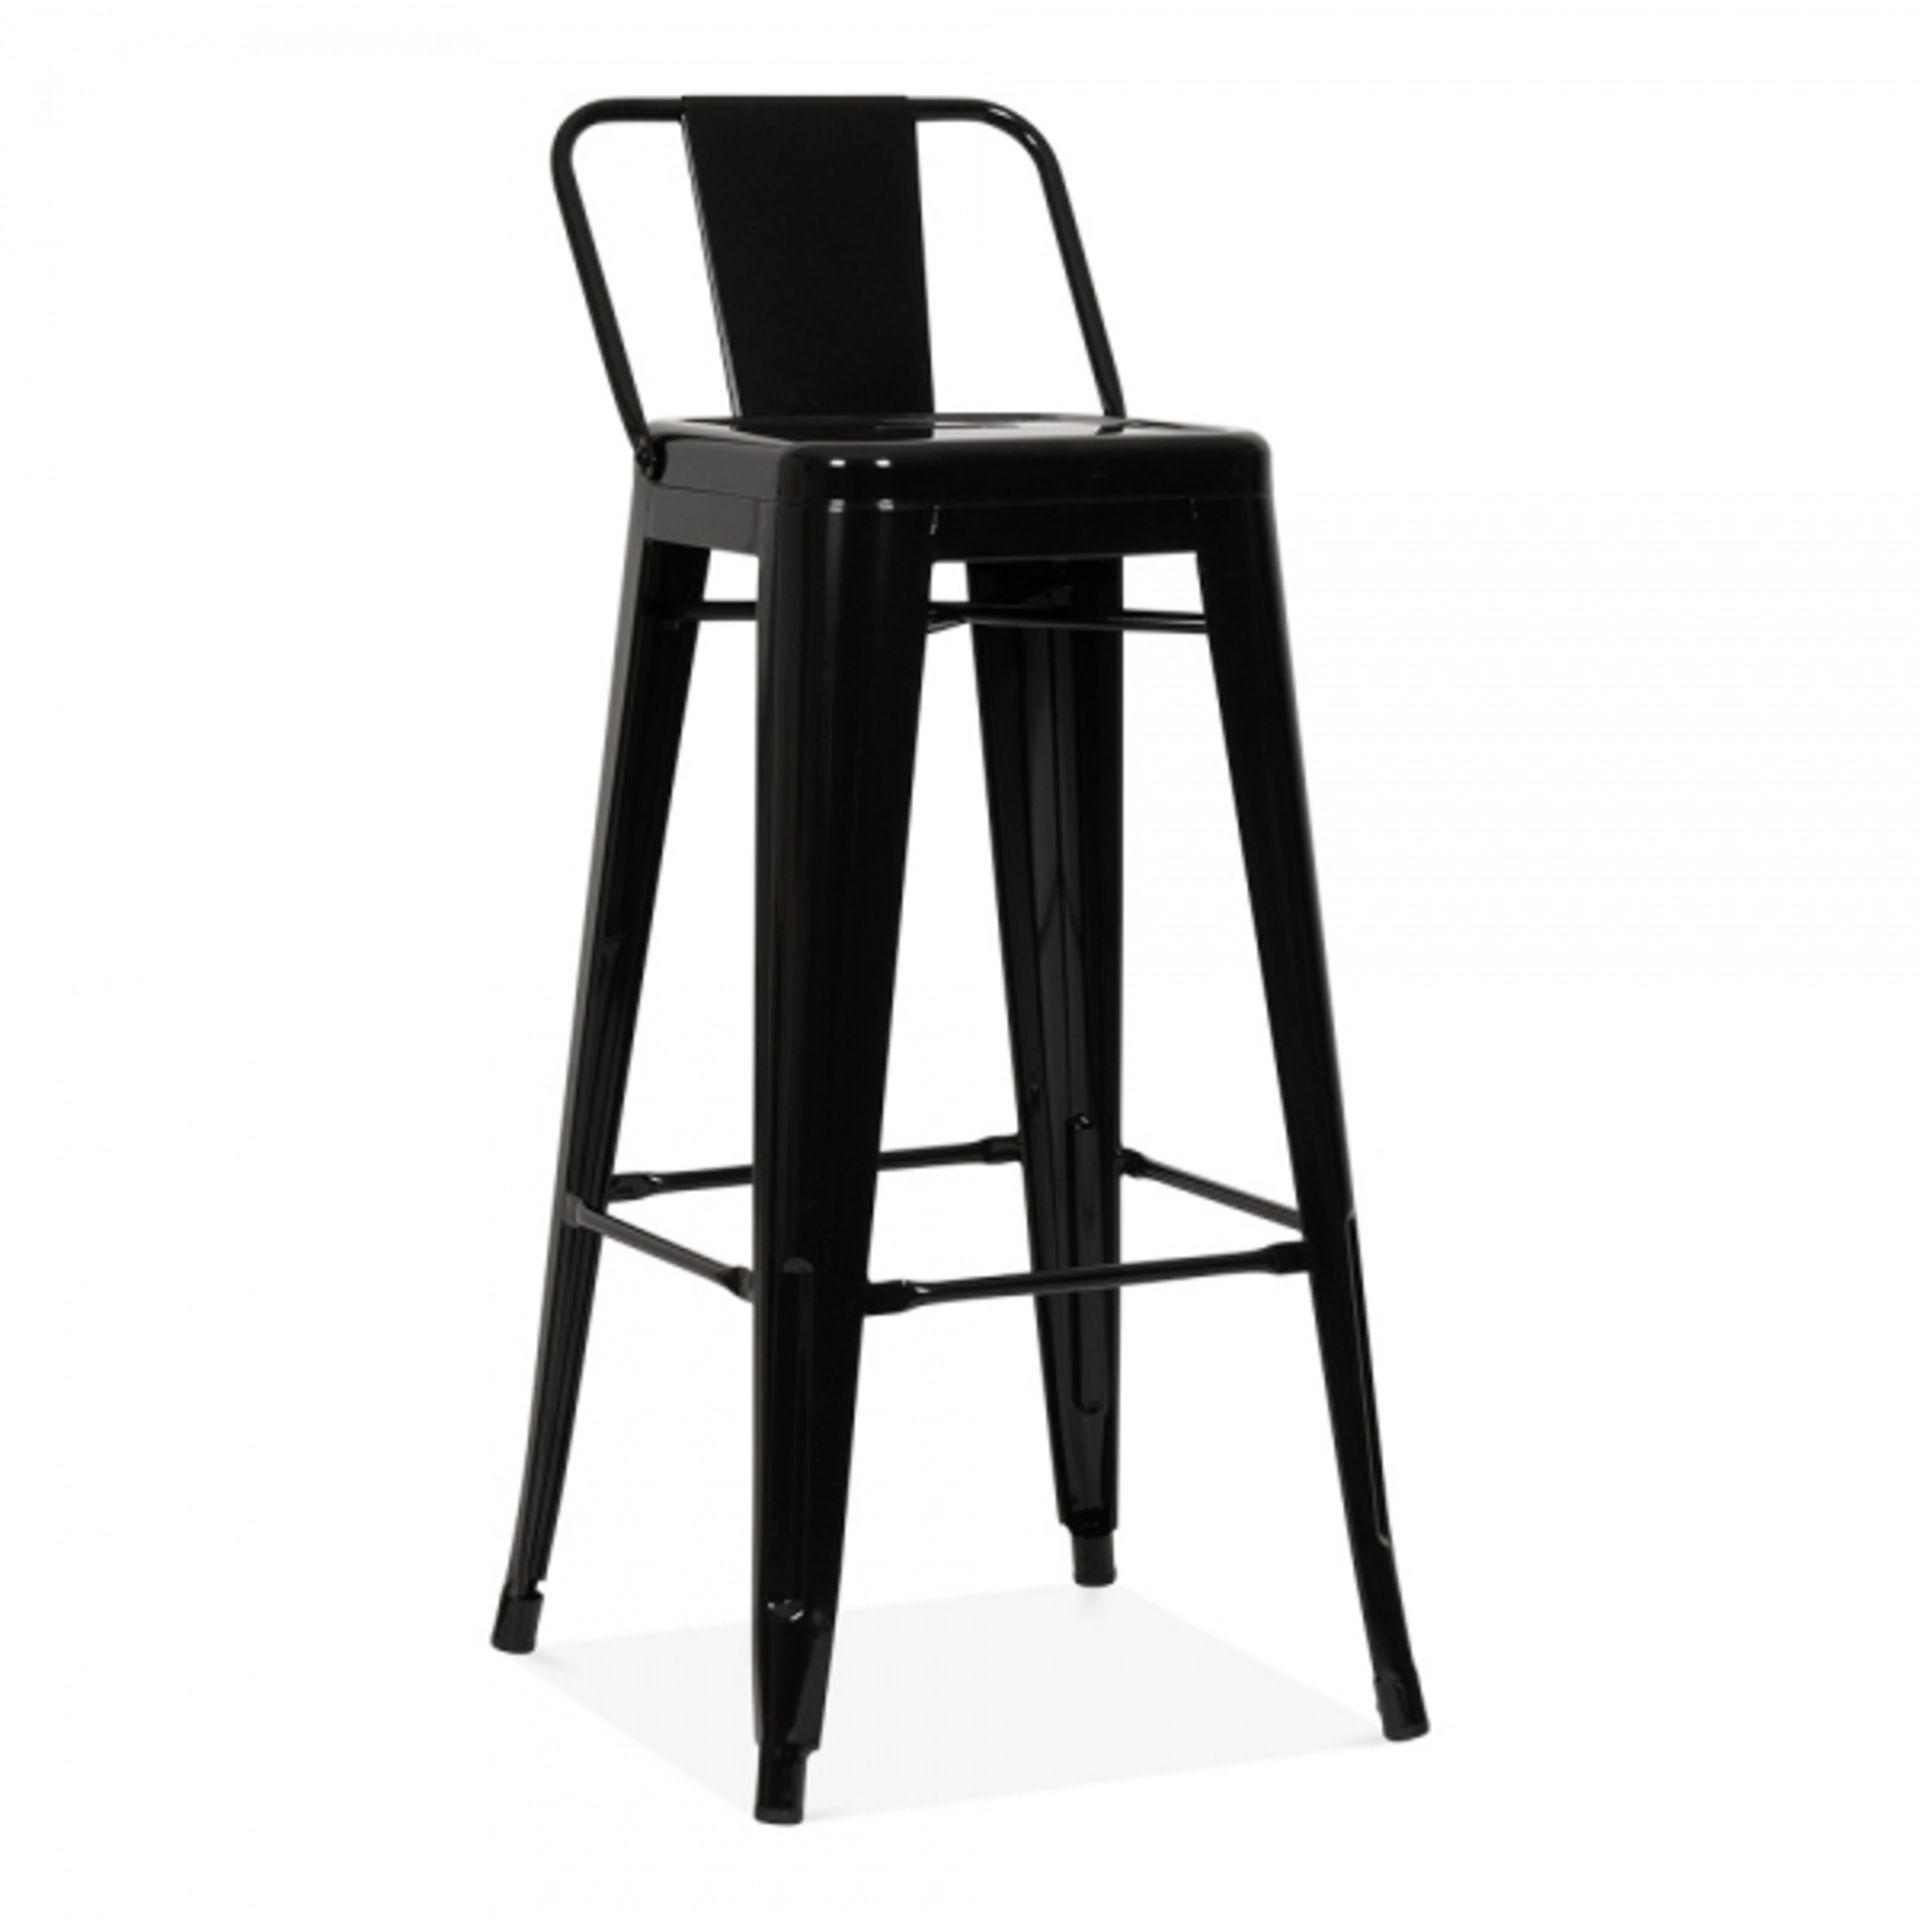 1 x Tolix Industrial Style Outdoor Bar Table and Bar Stool Set in Black - Includes 1 x Bar Table and - Image 3 of 7